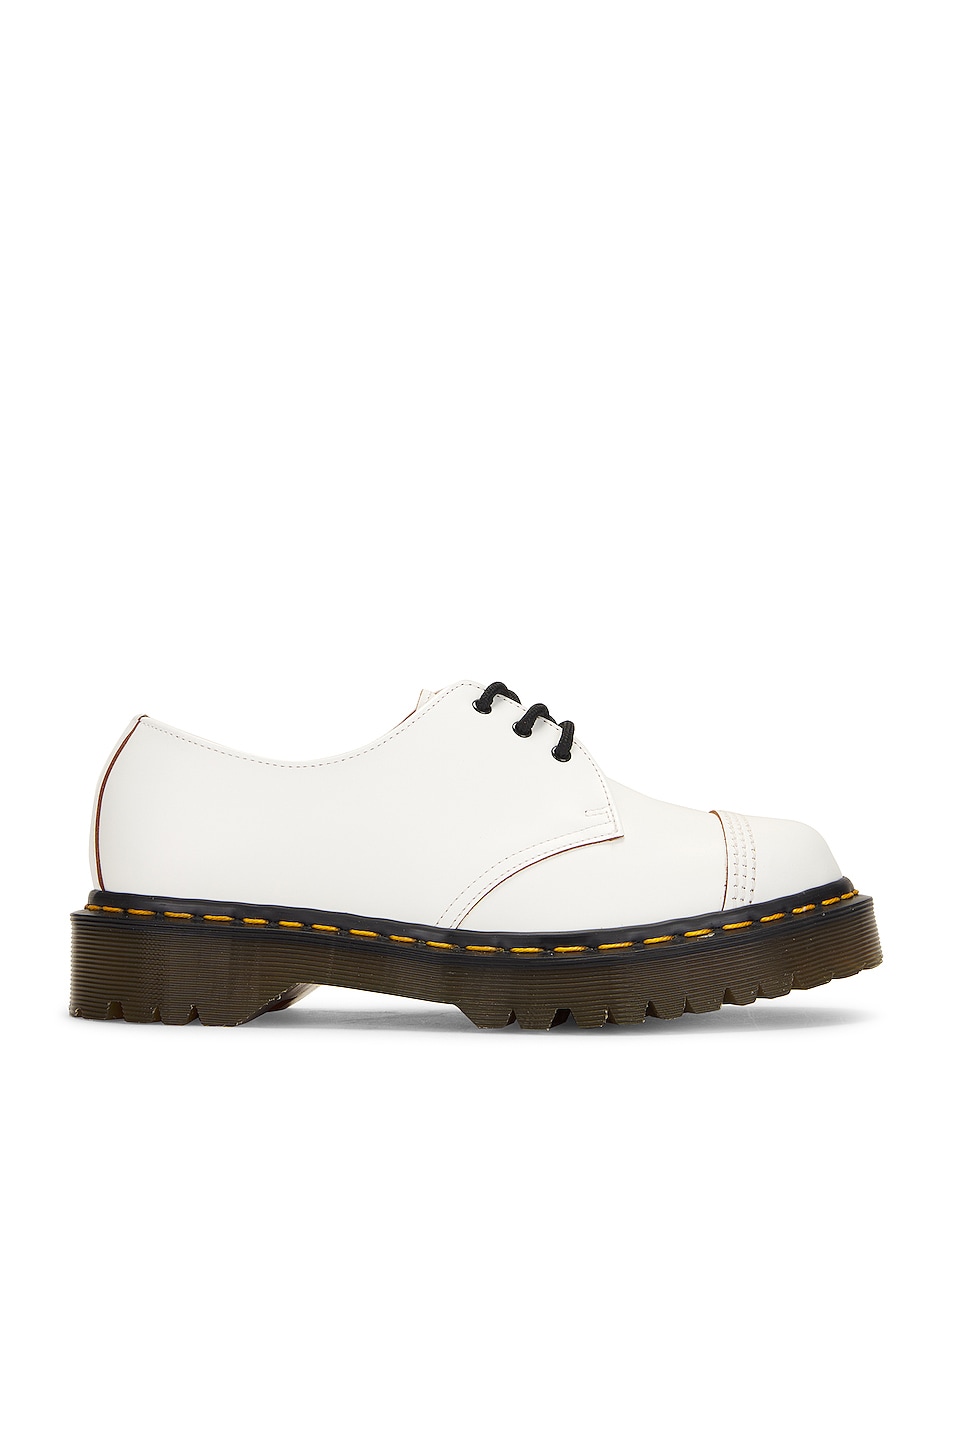 Image 1 of Dr. Martens Made in England 1461 Toe Cap Bex in White